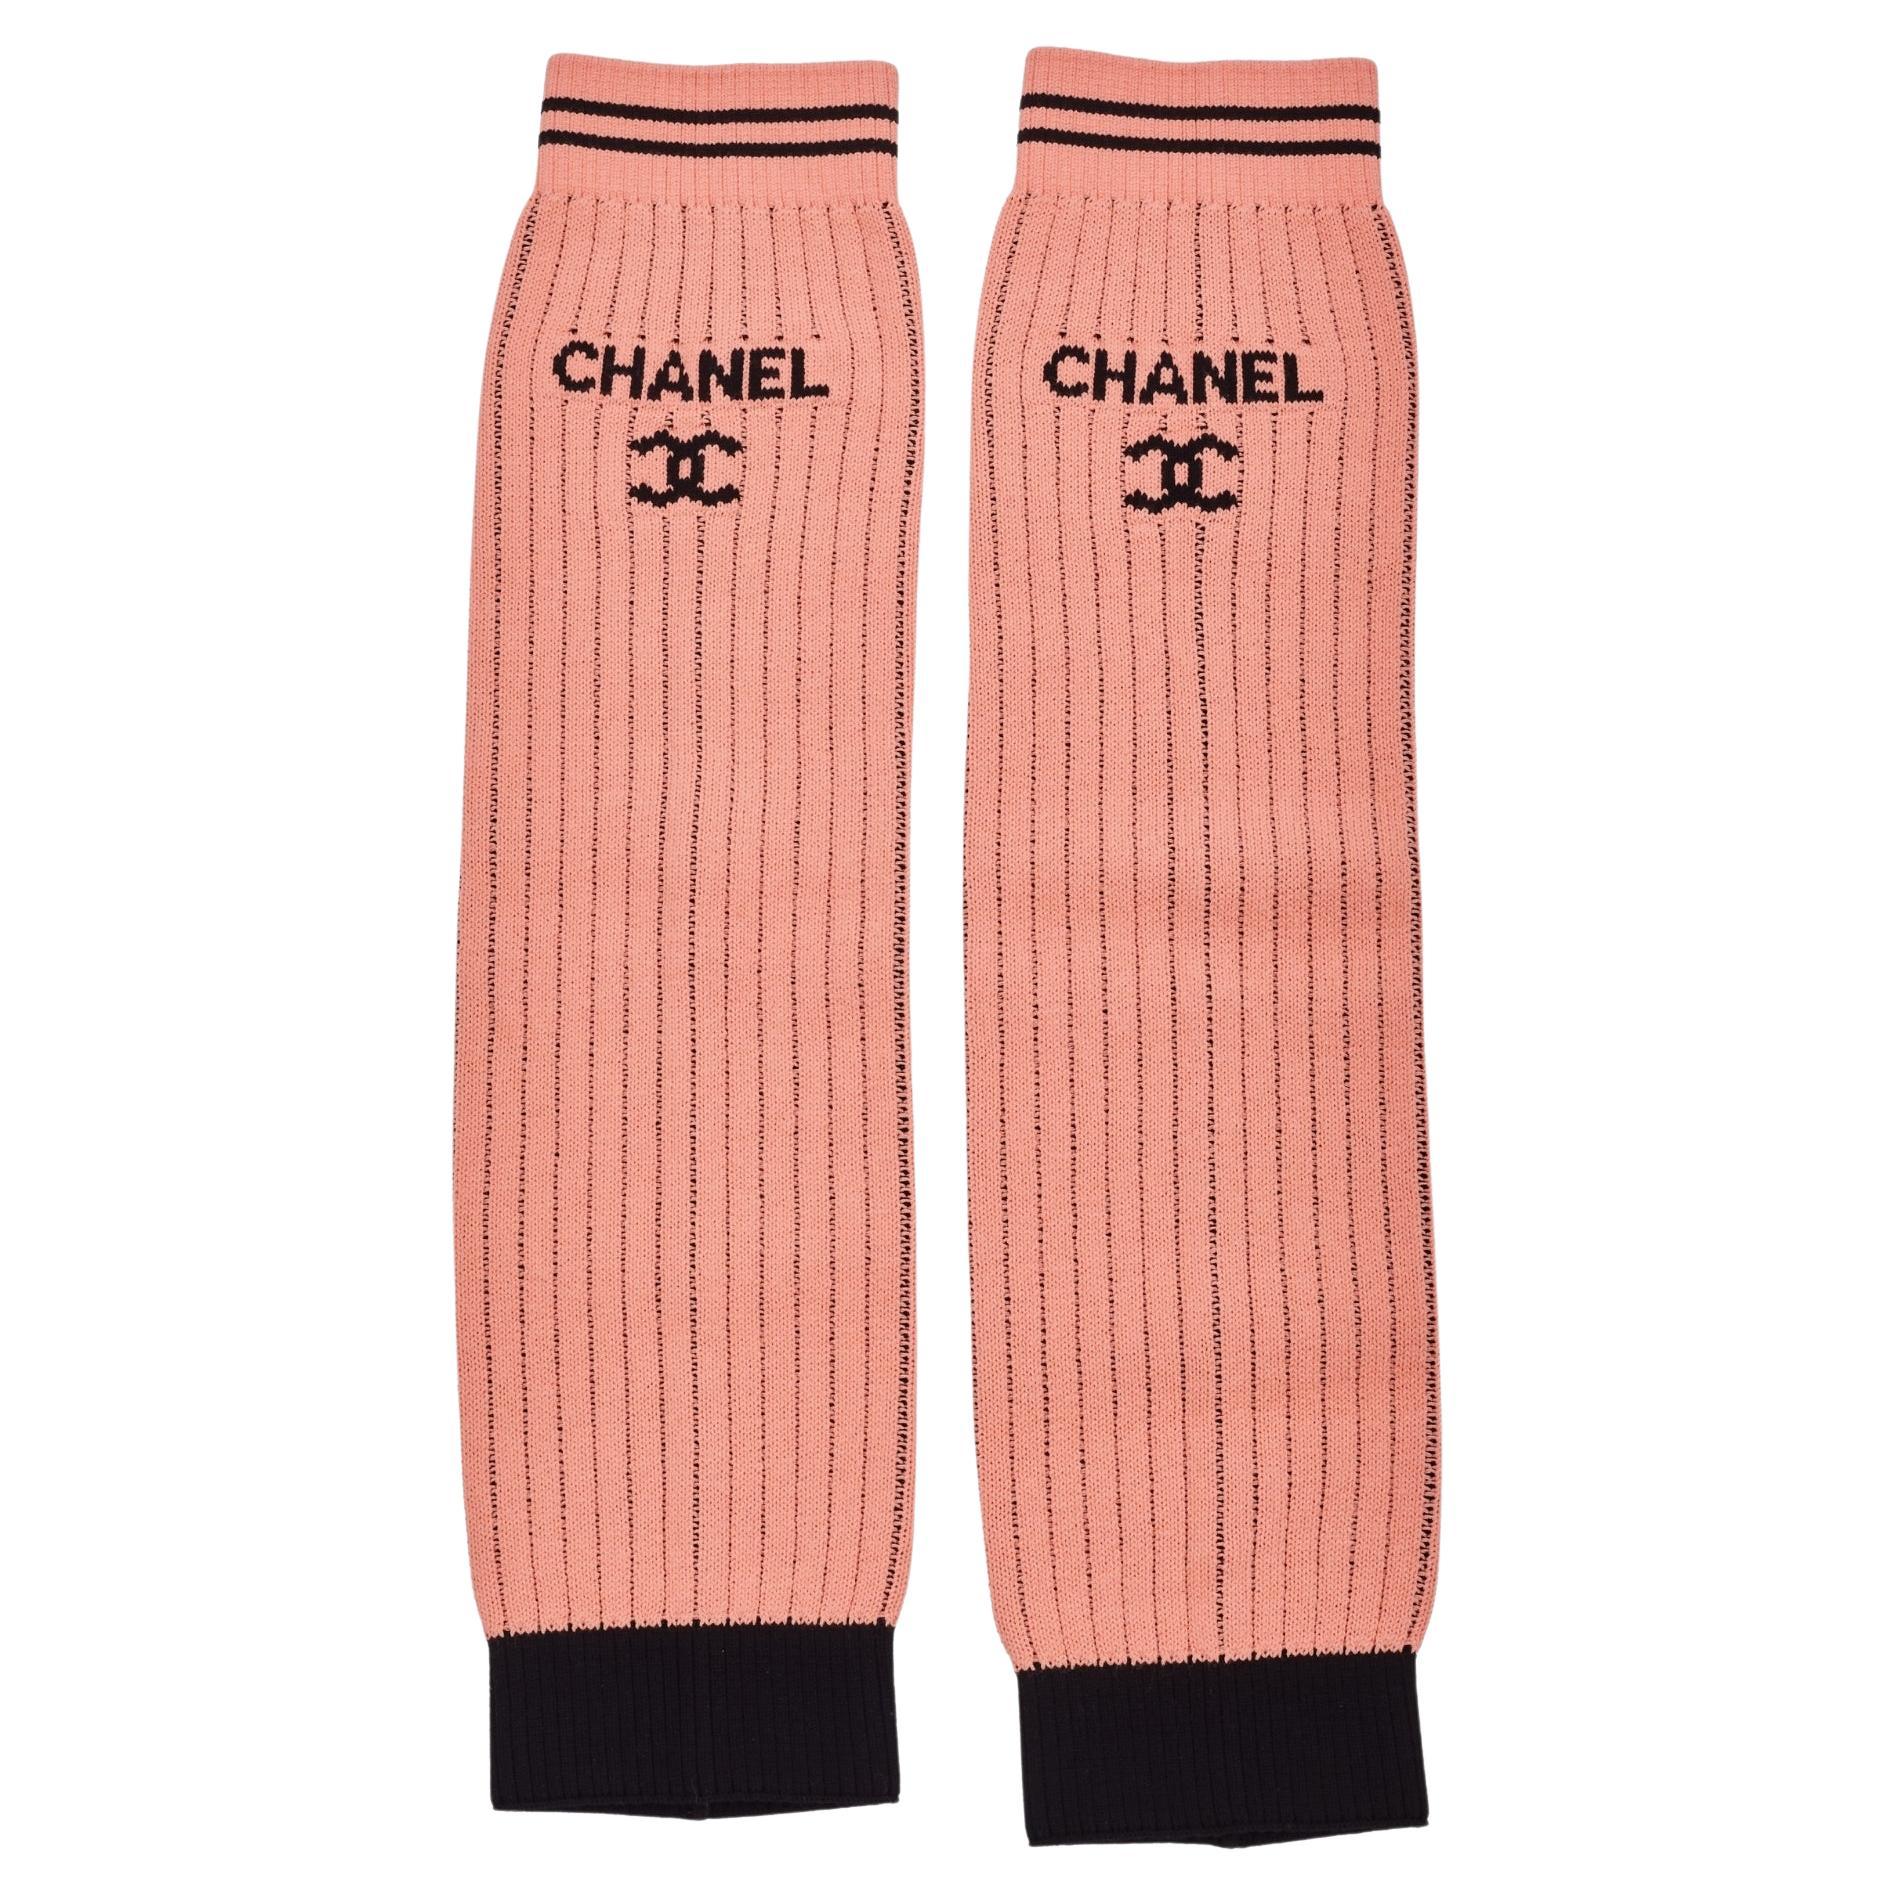 Chanel Logo Apricot Knit Leg Warmers Gaiters For Sale